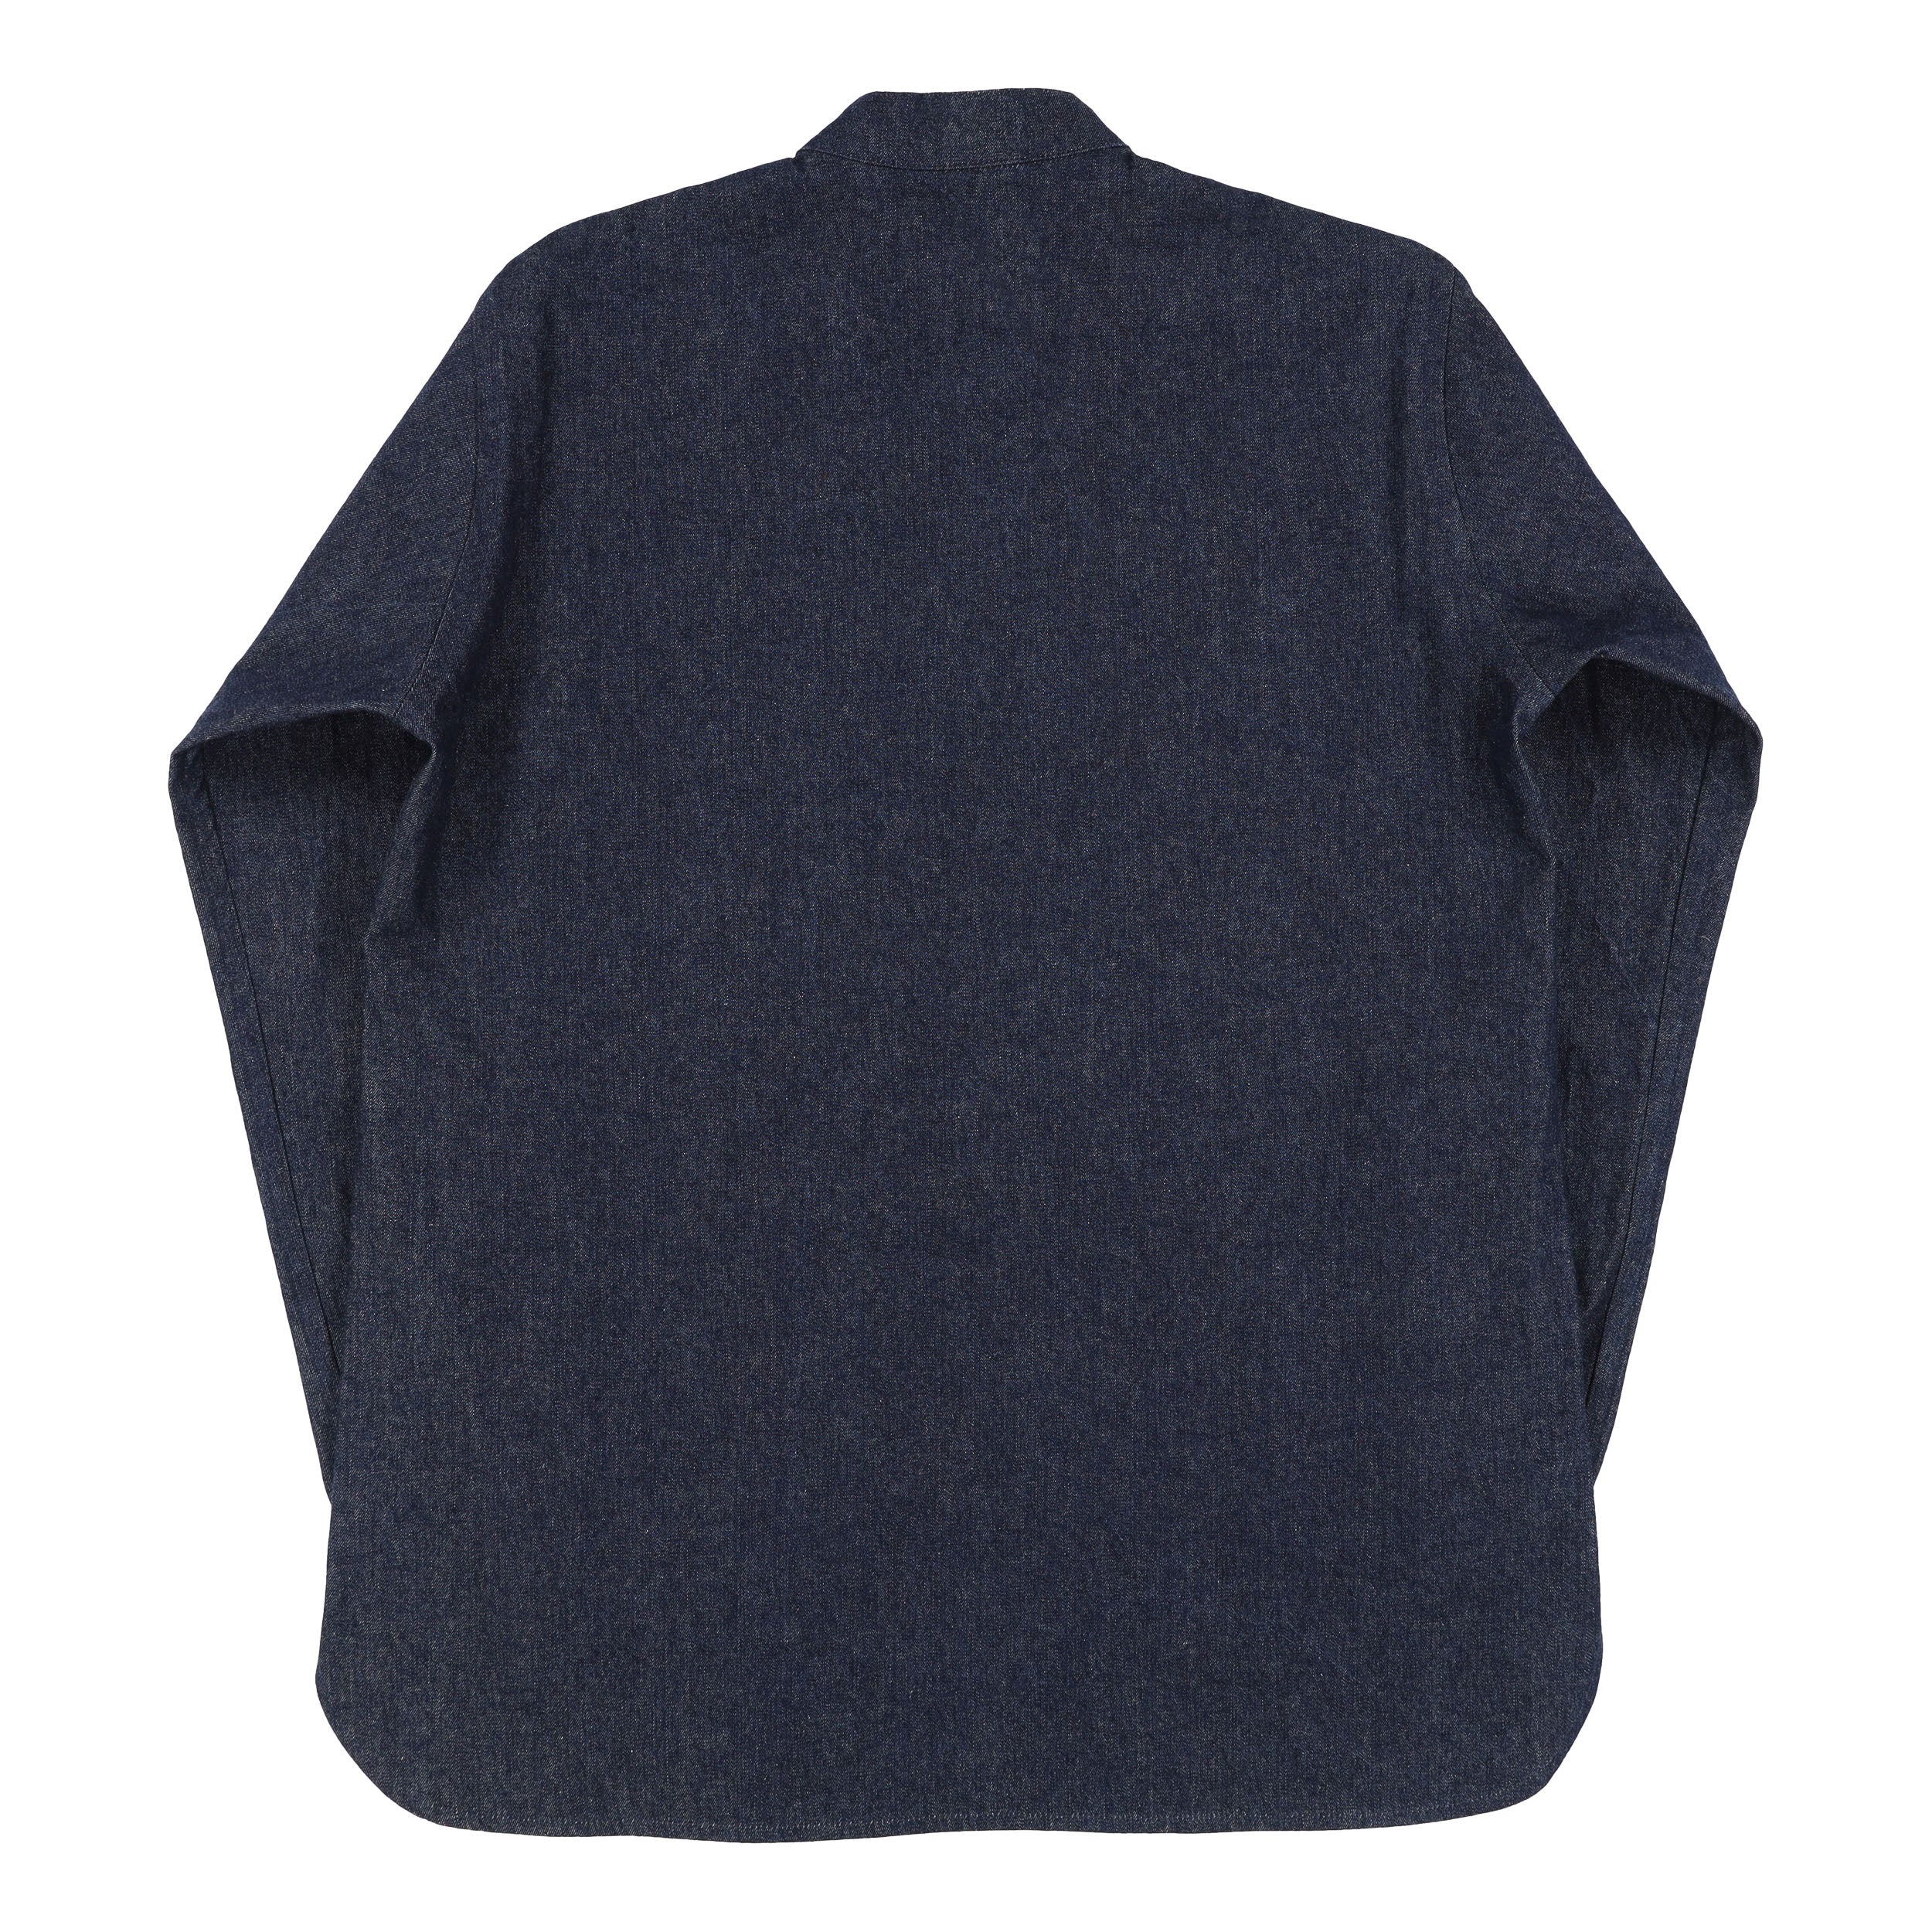 The back view of the Carrier Company Denim Work Shirt